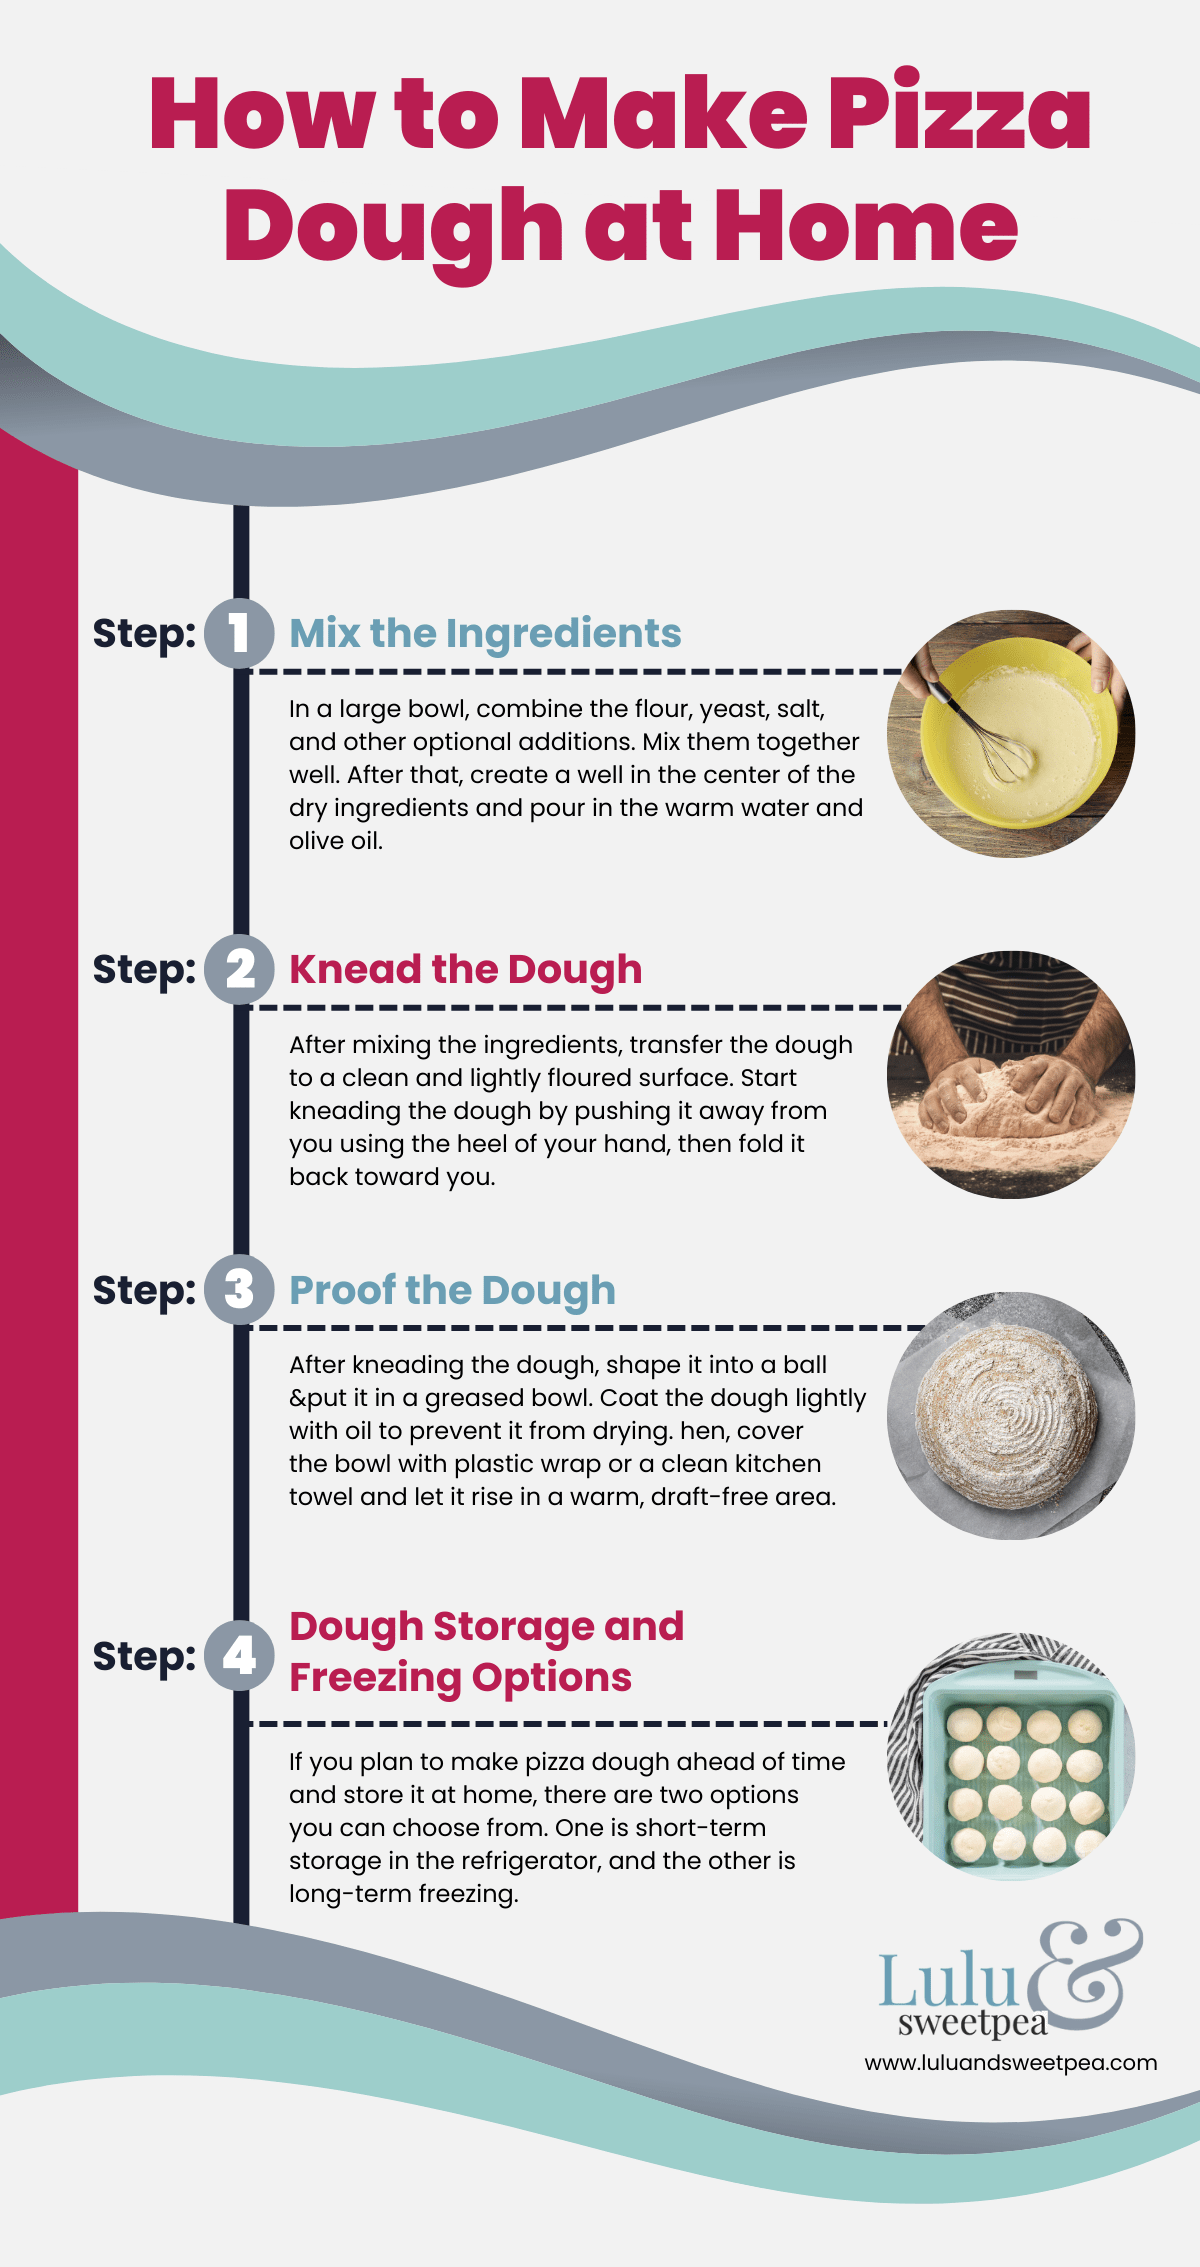 How to Make Pizza Dough at Home